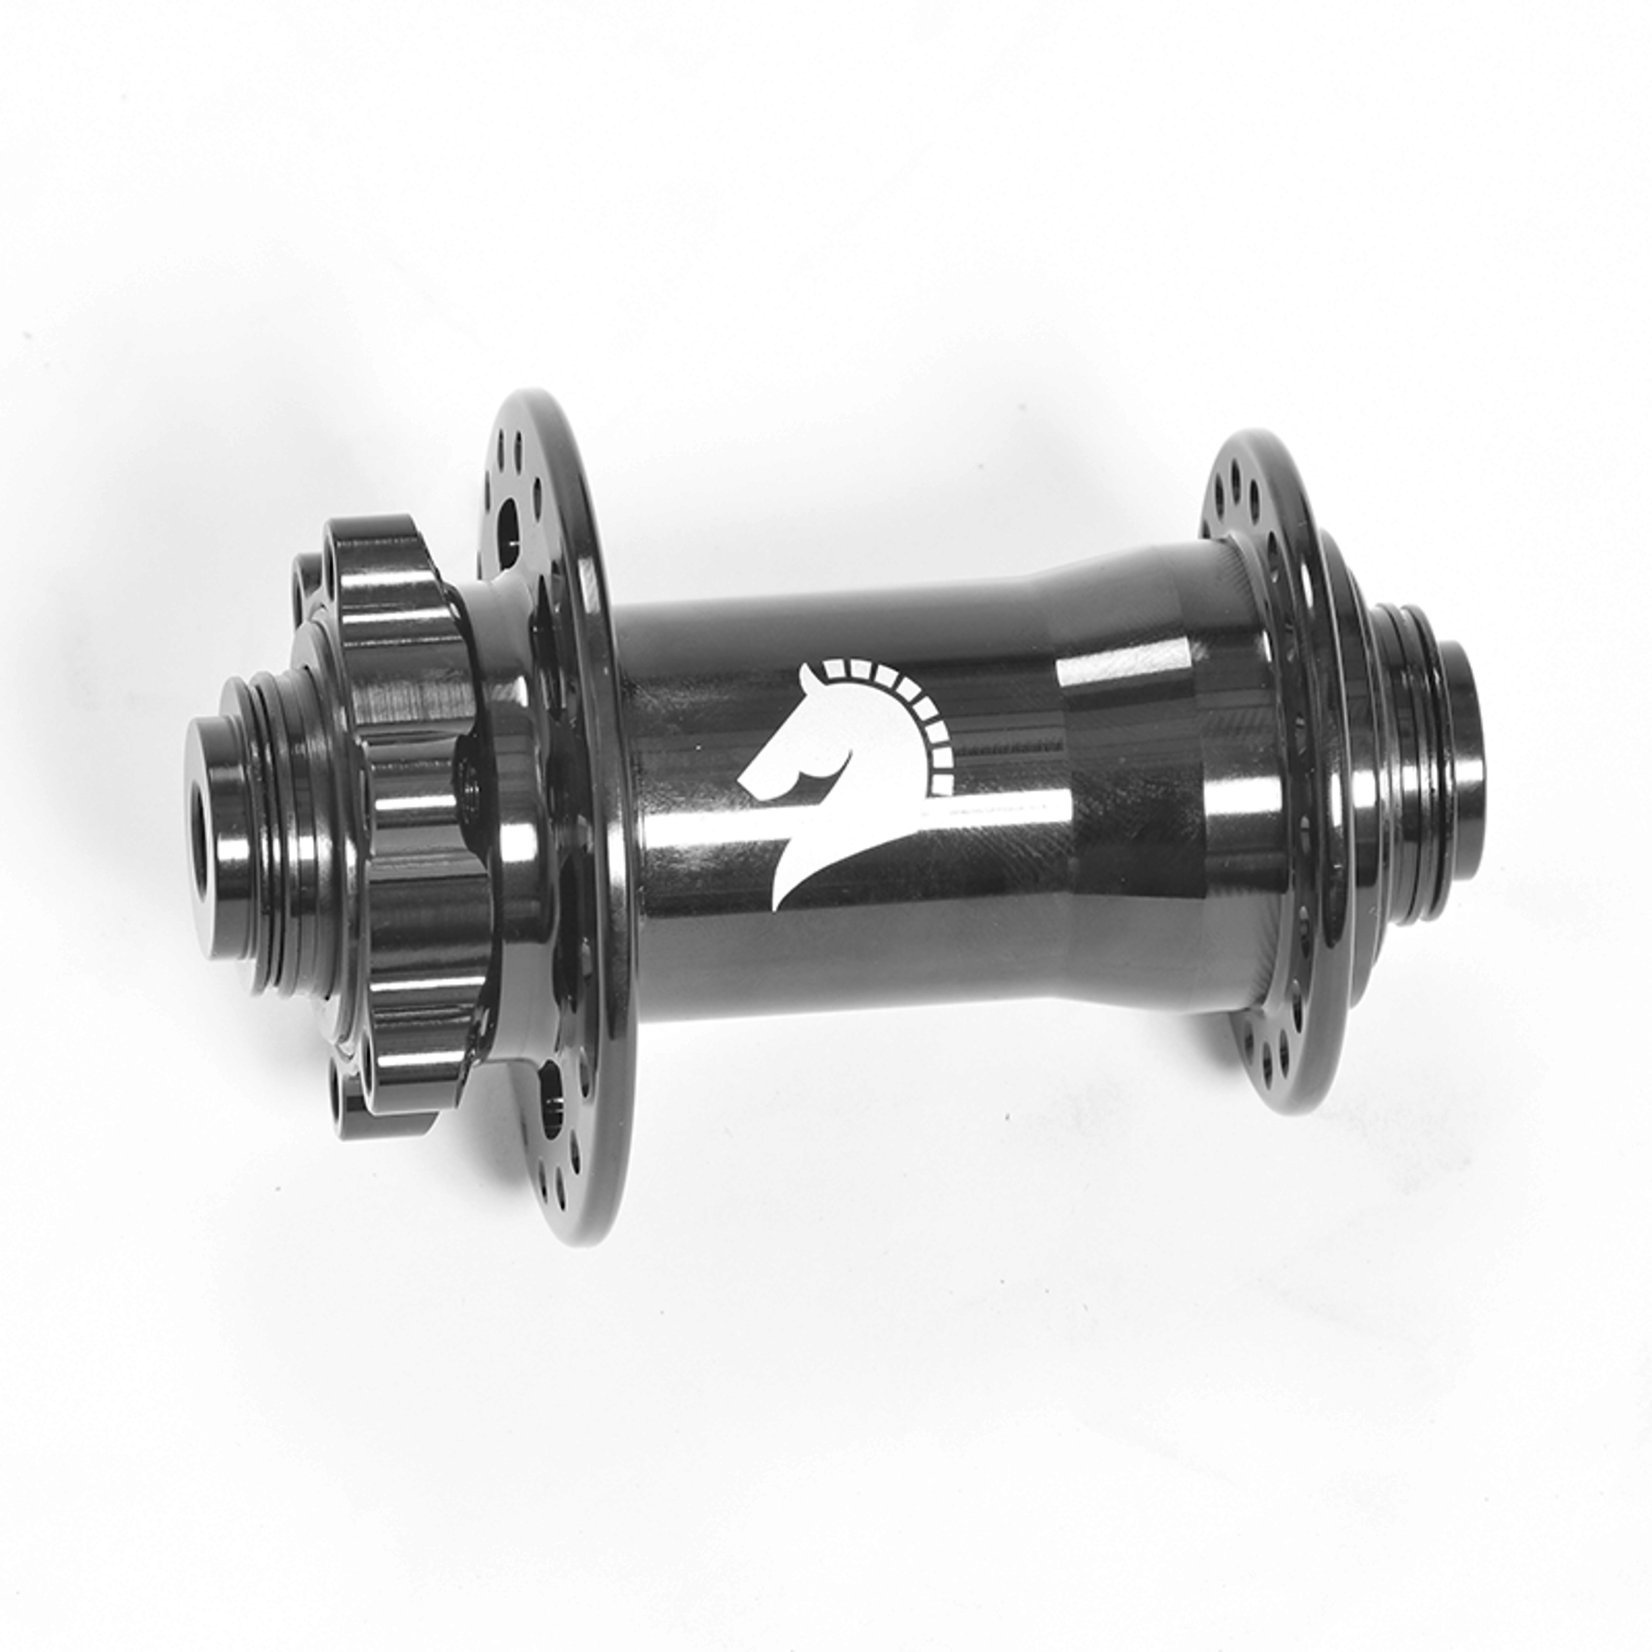 Clydesdale Front Fat Bike Hub - 32 hole 15x150mm - black